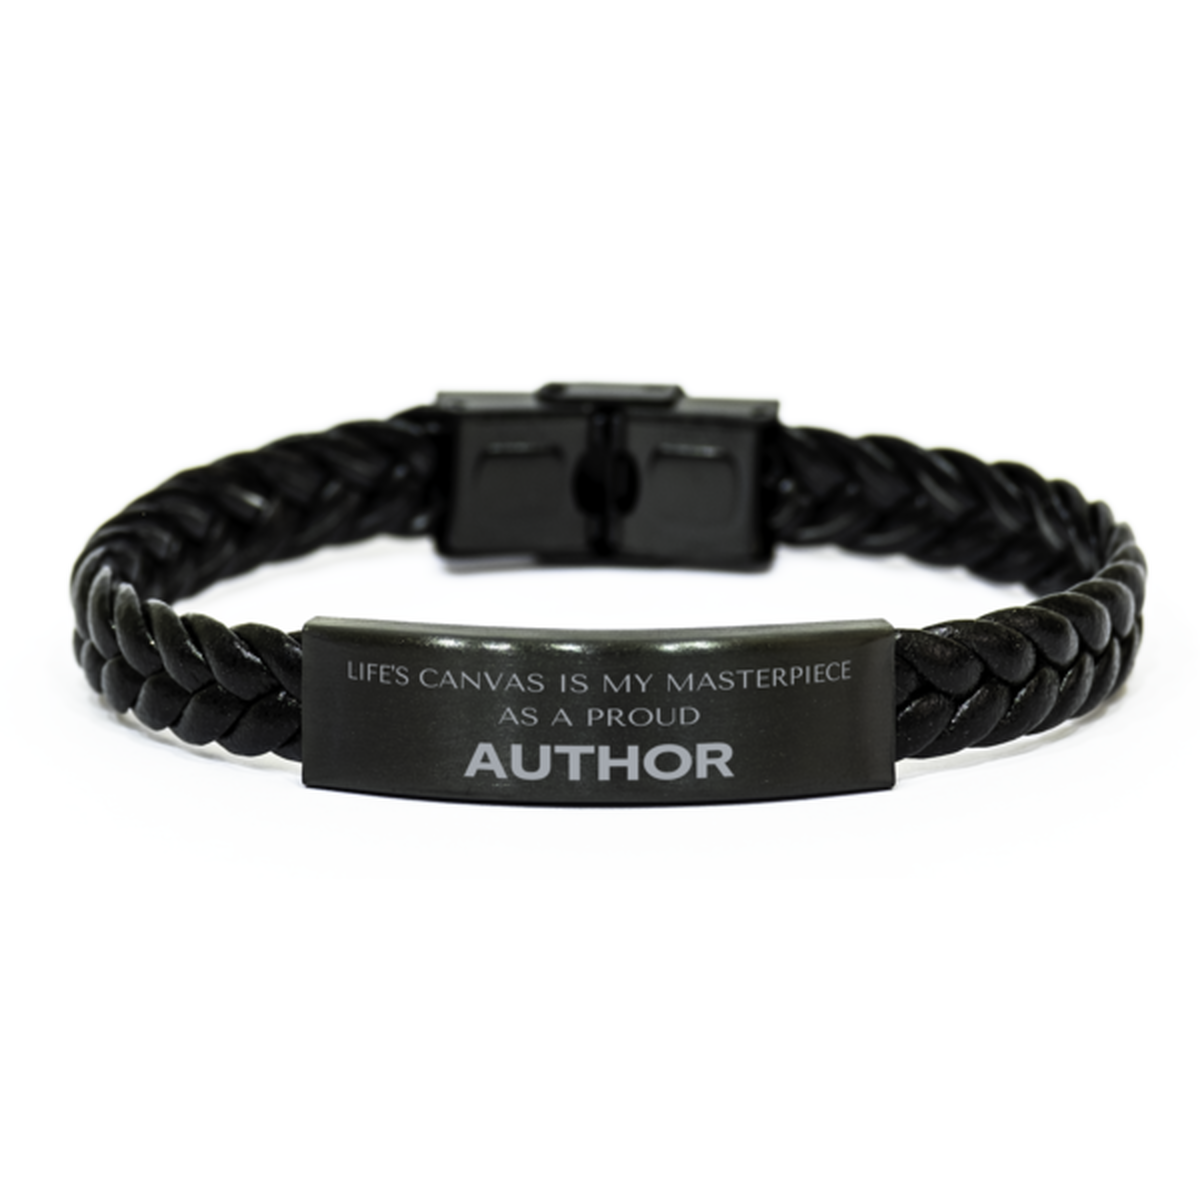 Proud Author Gifts, Life's canvas is my masterpiece, Epic Birthday Christmas Unique Braided Leather Bracelet For Author, Coworkers, Men, Women, Friends